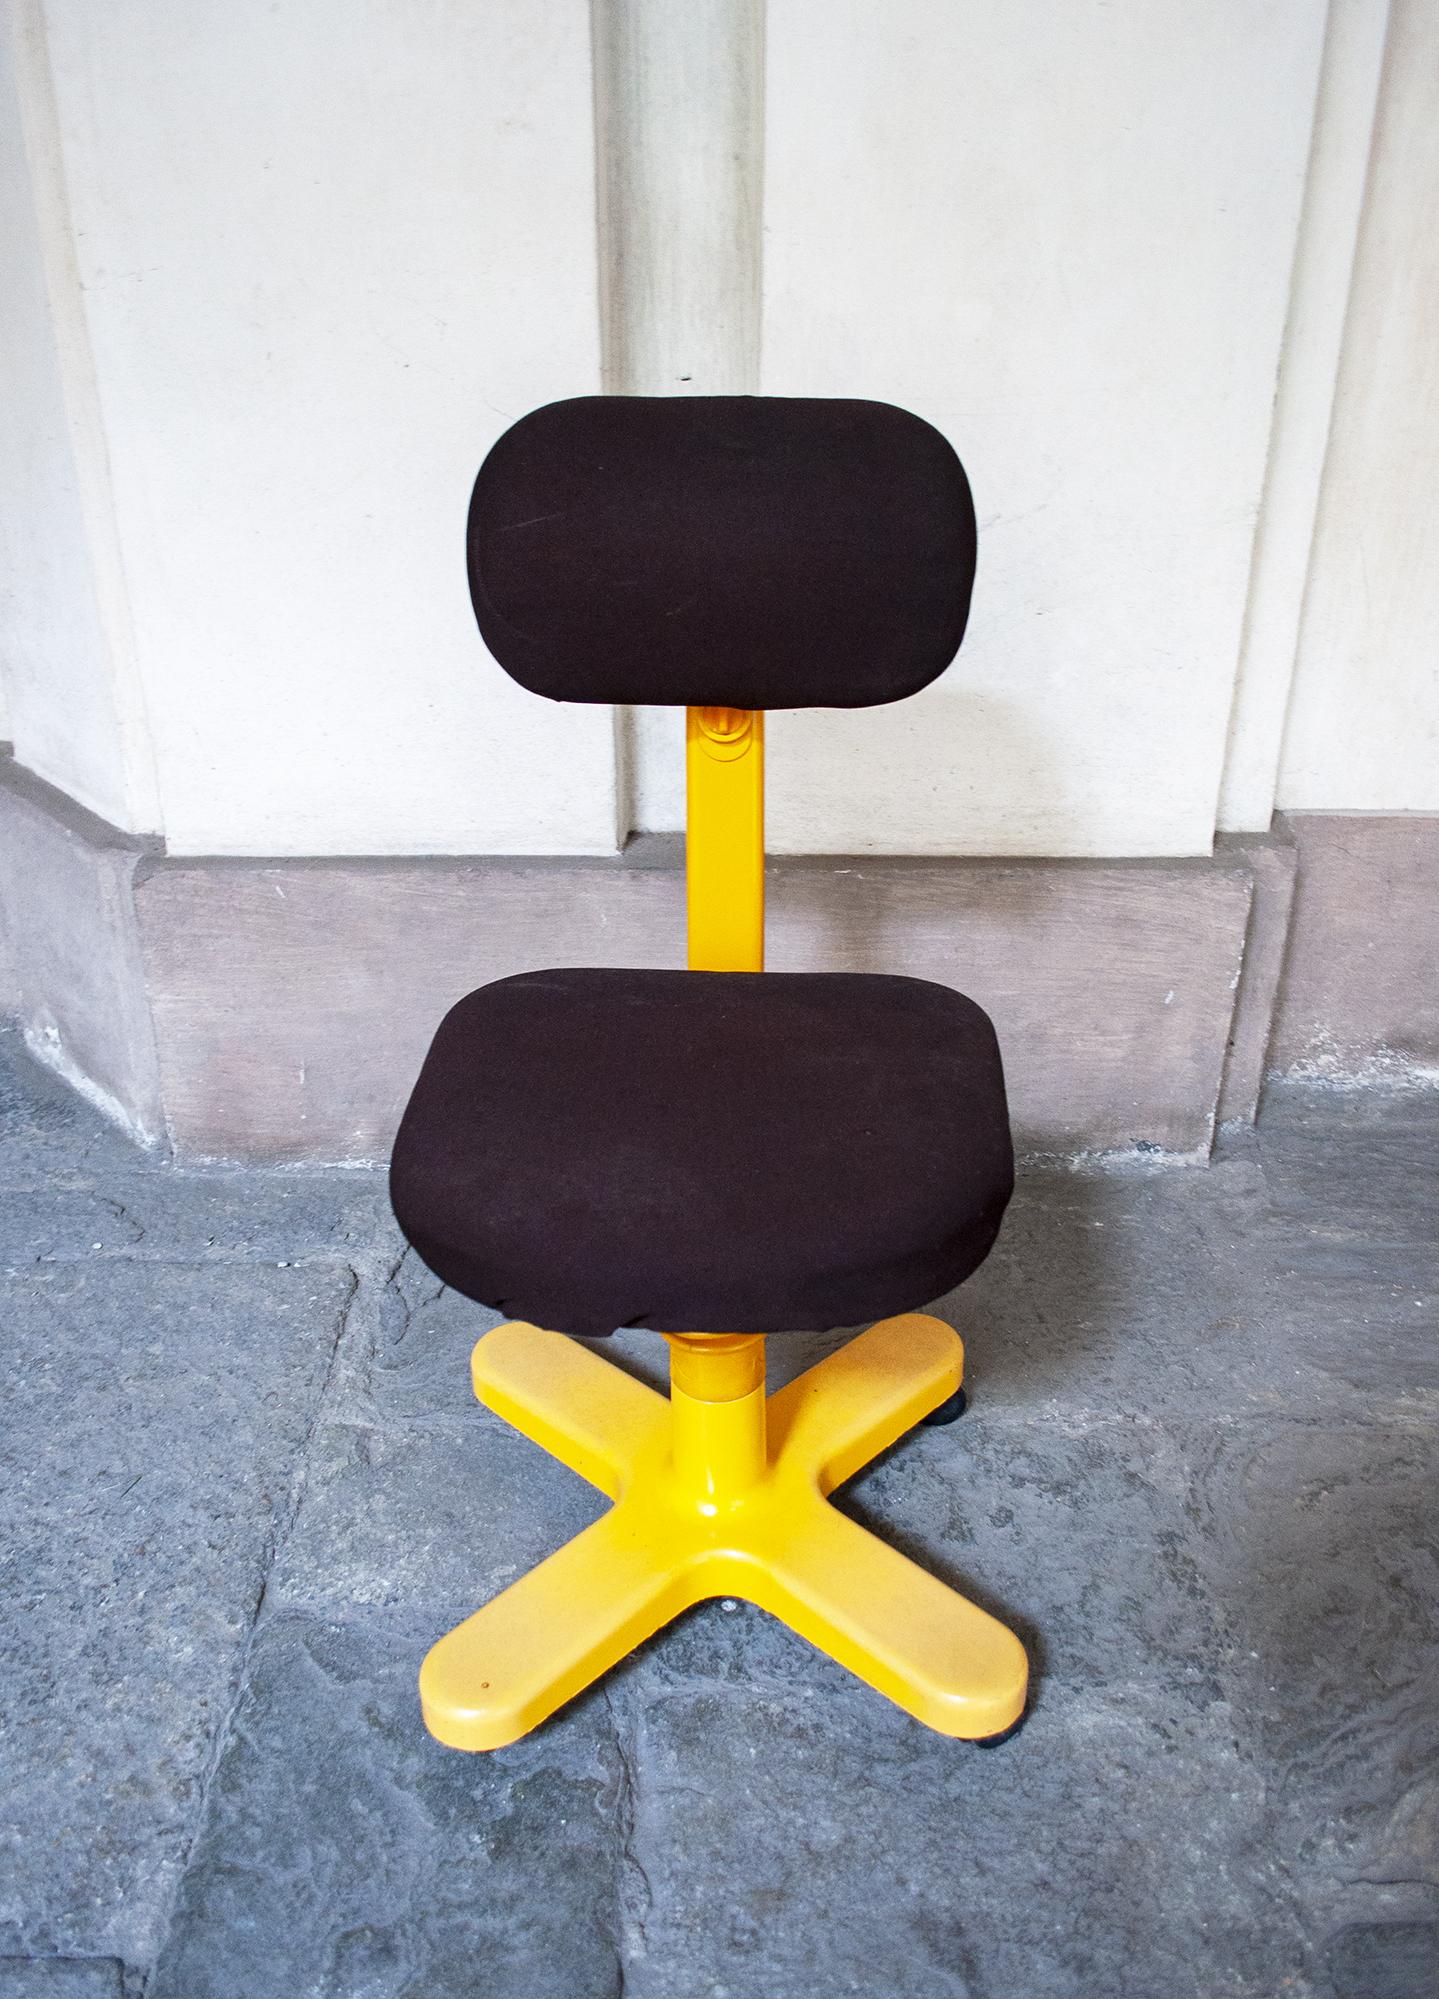 Office swivel chair with aluminum frame, sponge seat lined in fabric, plastic wheels.
Model Synthesis 45
Designer Ettore Sottsass
Producer Olivetti
Distributed by Conran
1960s.